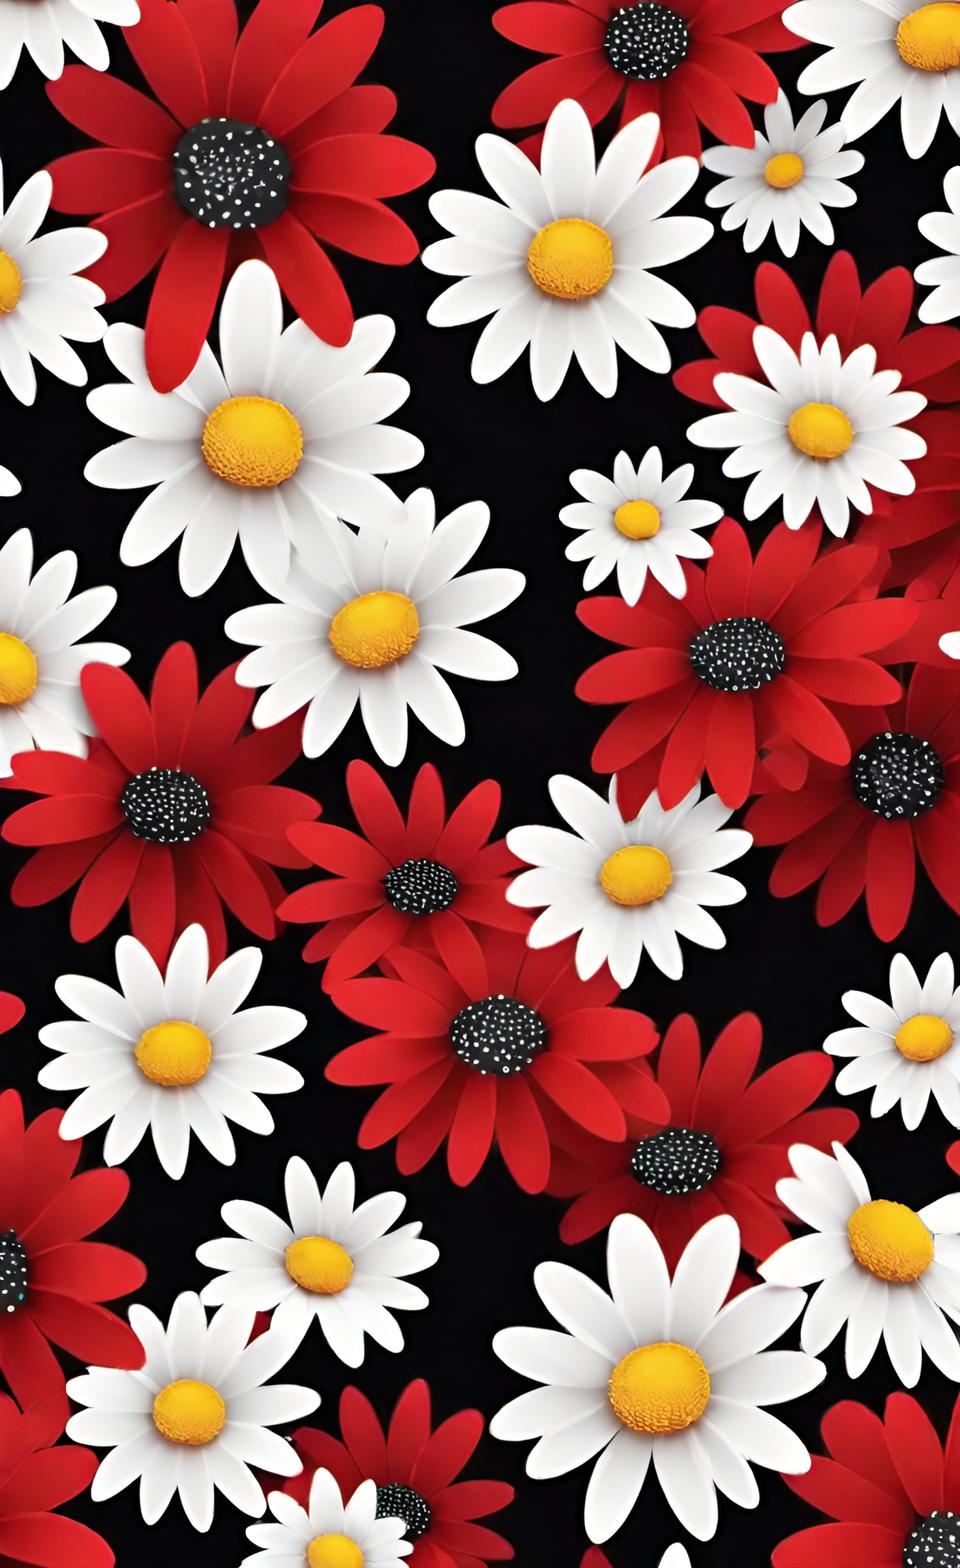 Small Daisies Red Black White Colorful Cute Background Wallpaper 4K For Free Download